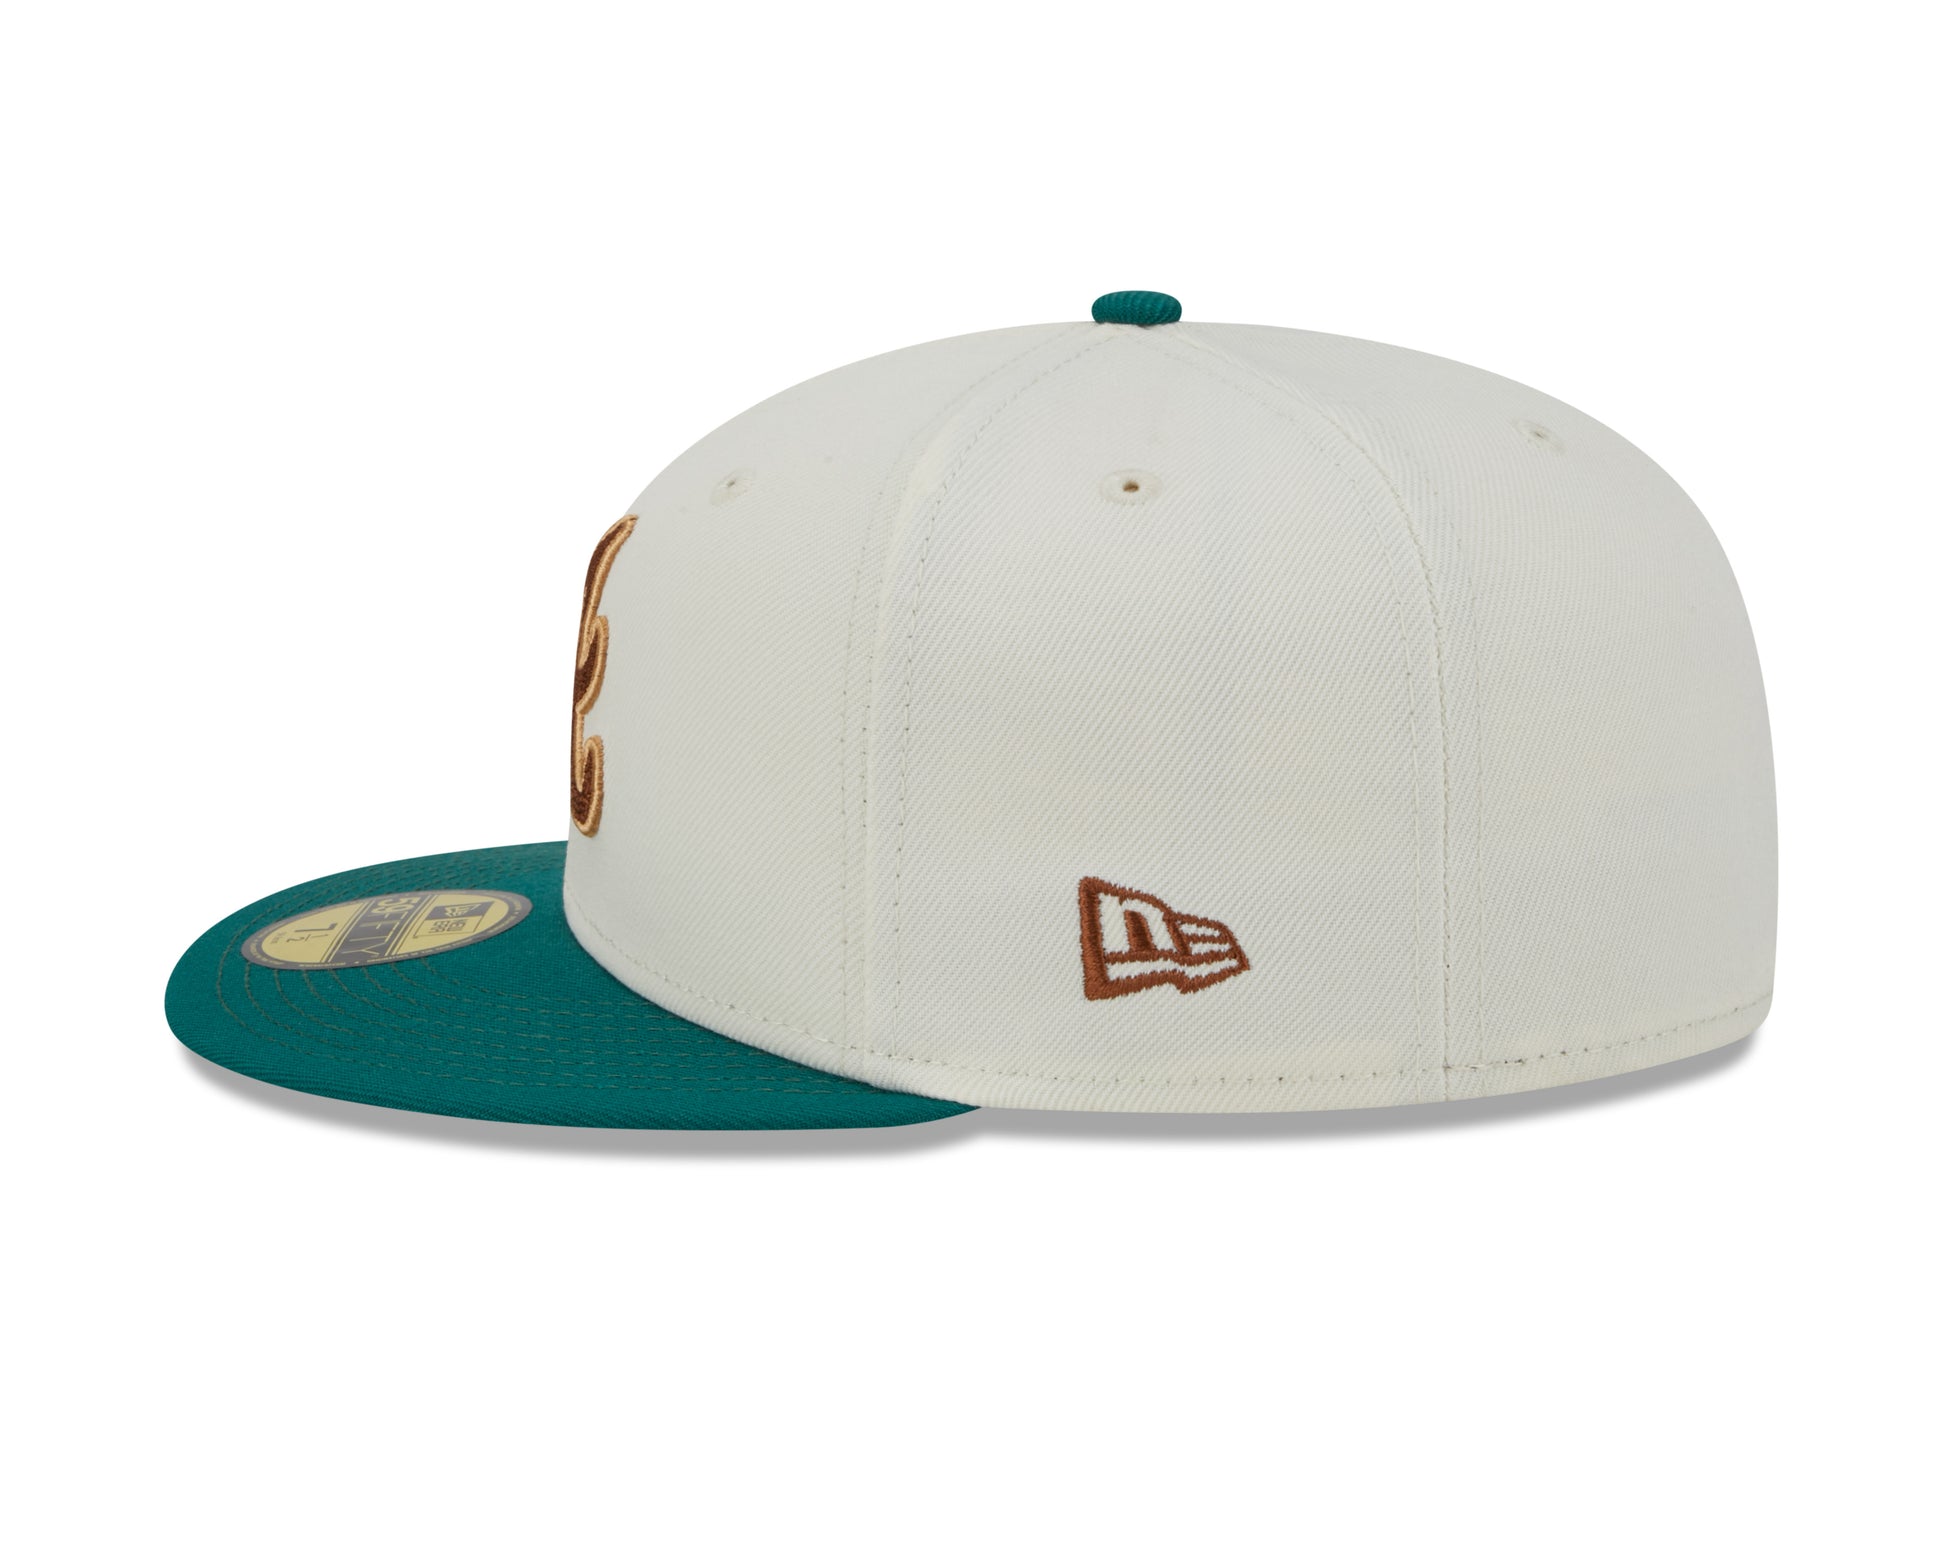 New Era - 59Fifty Fitted Cap - CAMP - Atlanta Braves 30th - White/Green - Headz Up 